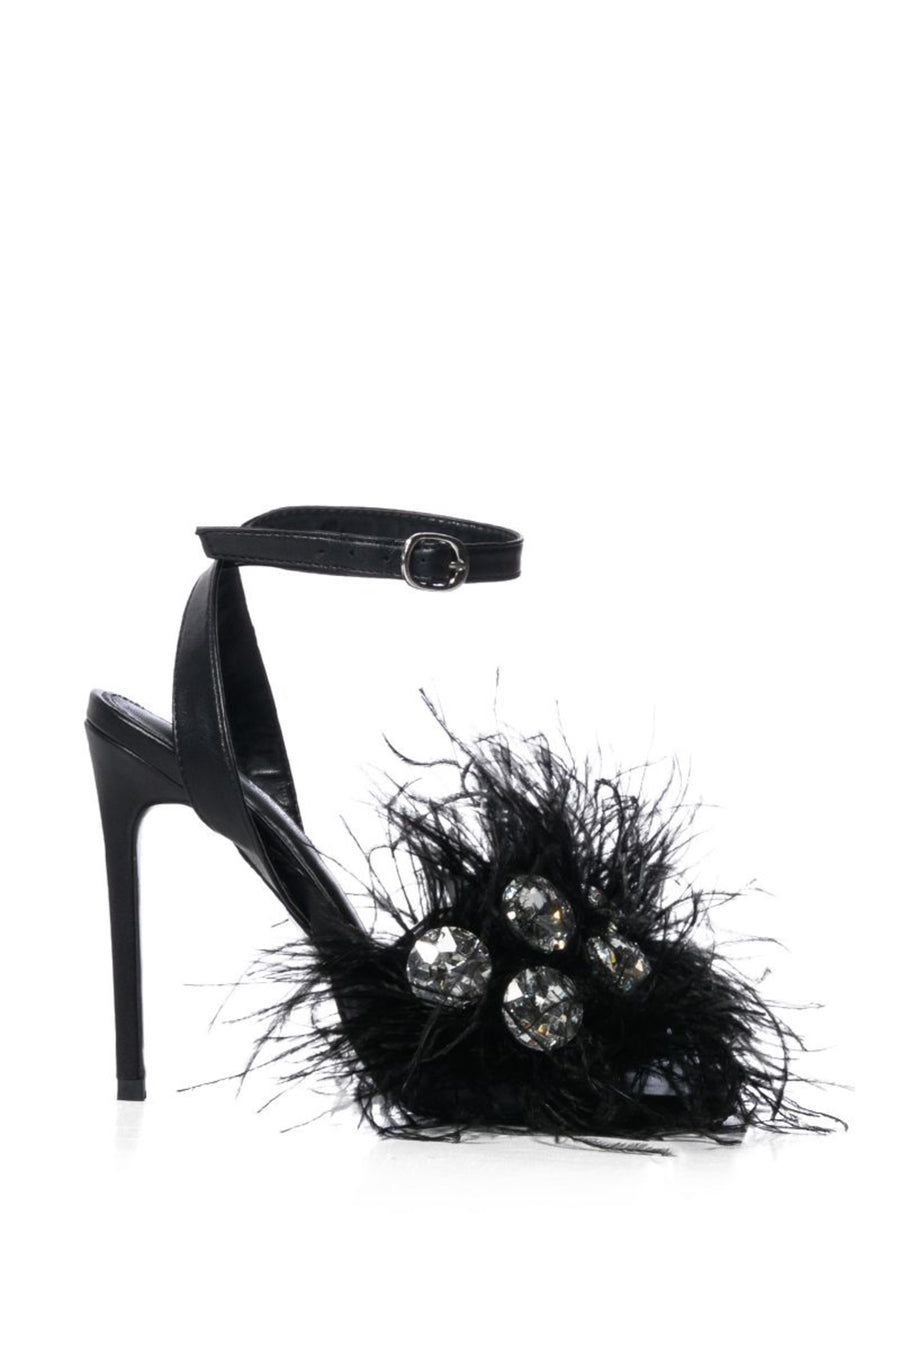 black open toe stiletto heels with an adjustable ankle strap and feather and rhinestone detail